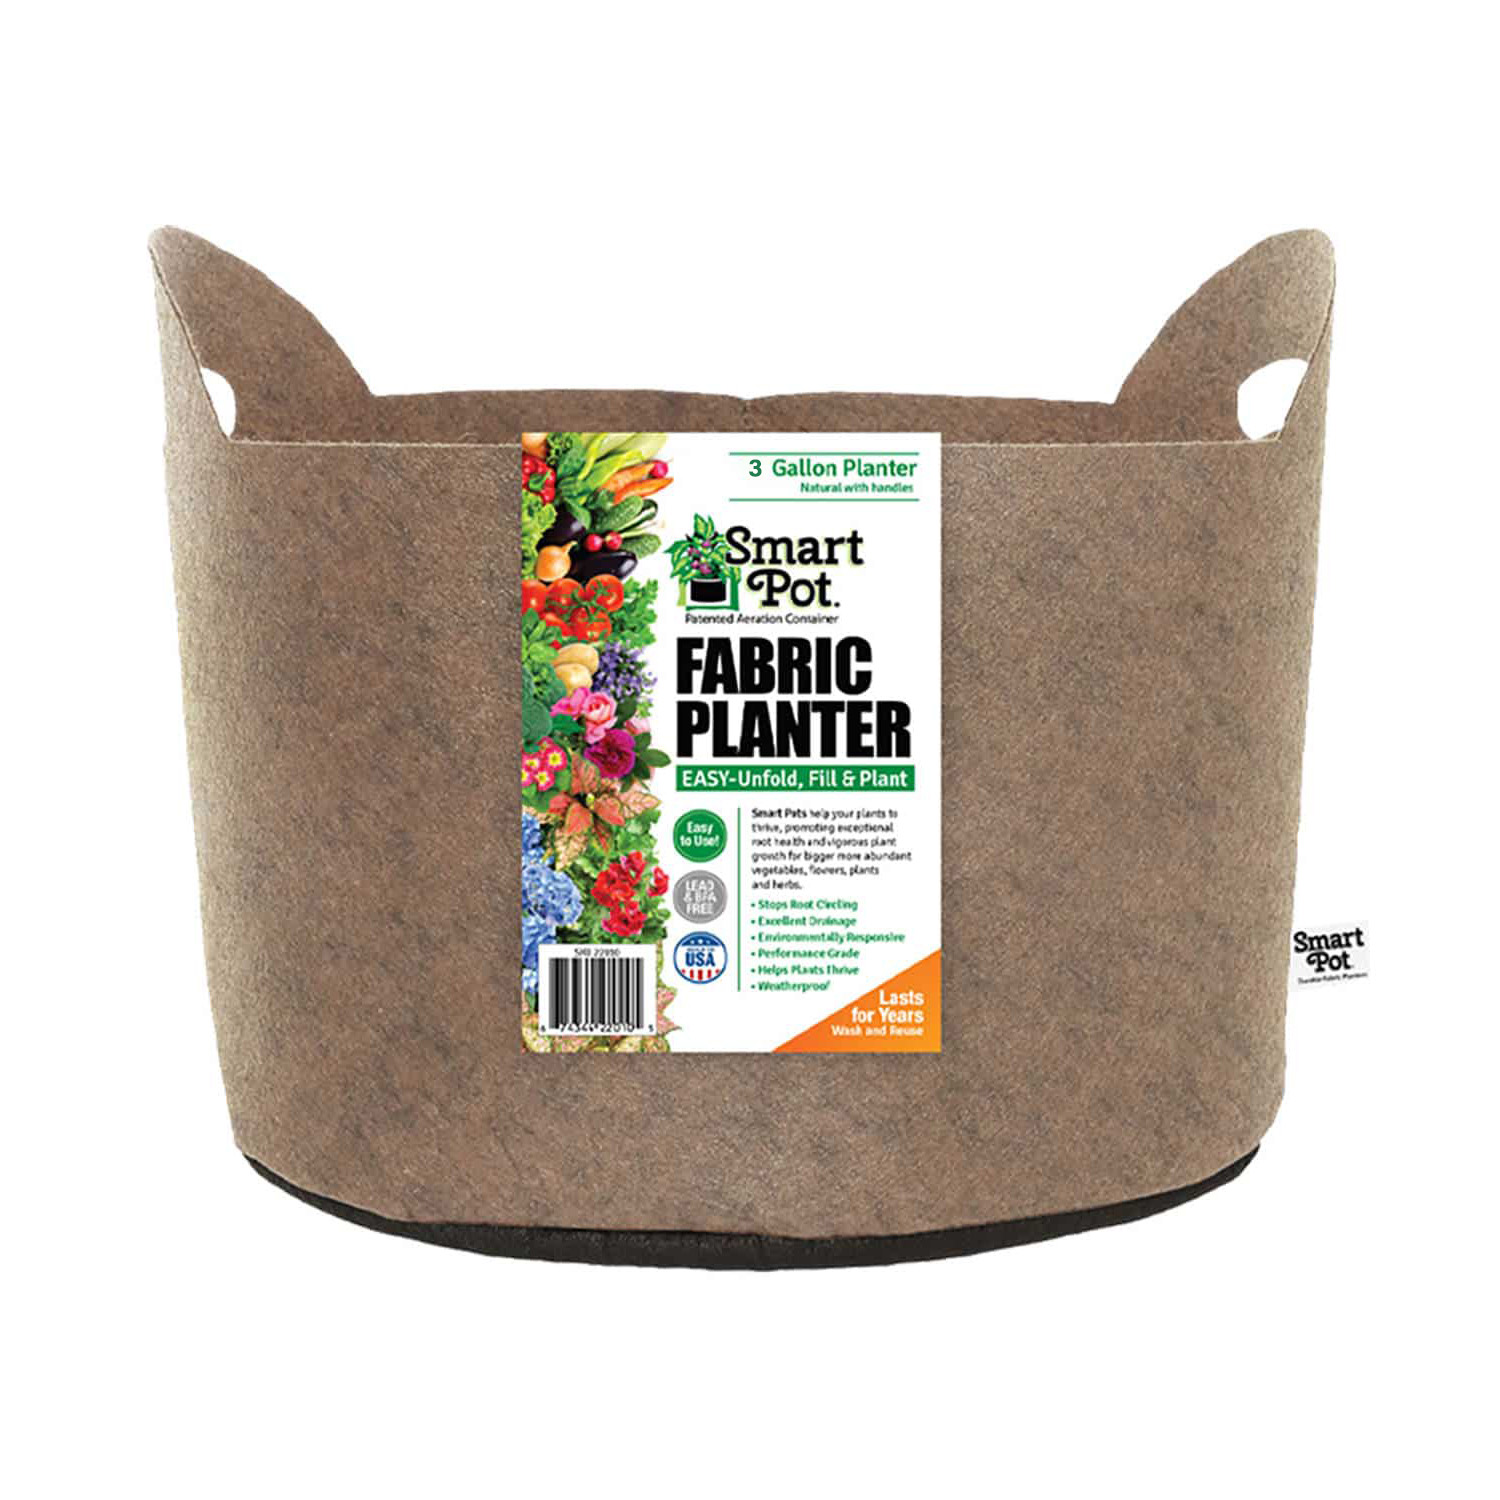 4-Gallon Black Grow Bags (4-Pack), Fabric Planter Bags for